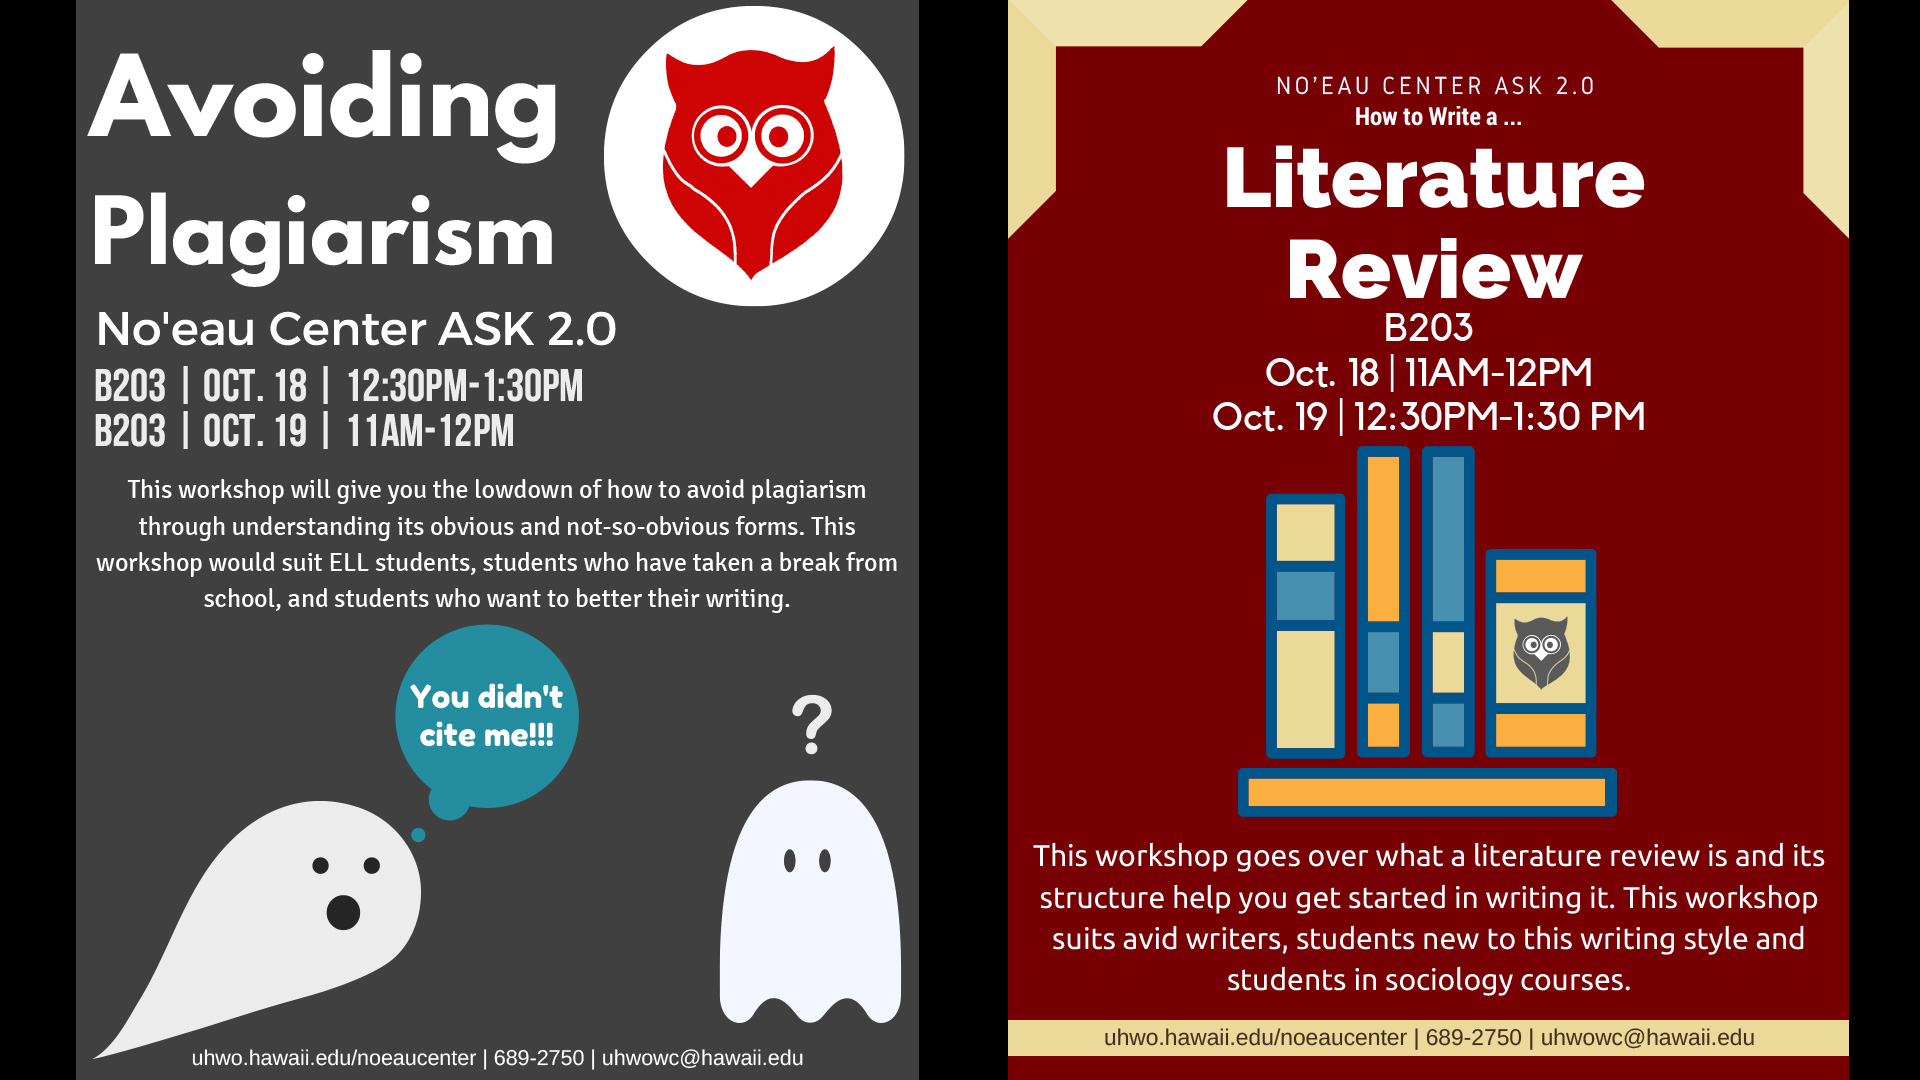 Noeau Center's ASK 2.0 Workshops on "How to Write a Literature Review" and "Avoiding Plagiarism" on Oct. 18 and 19.